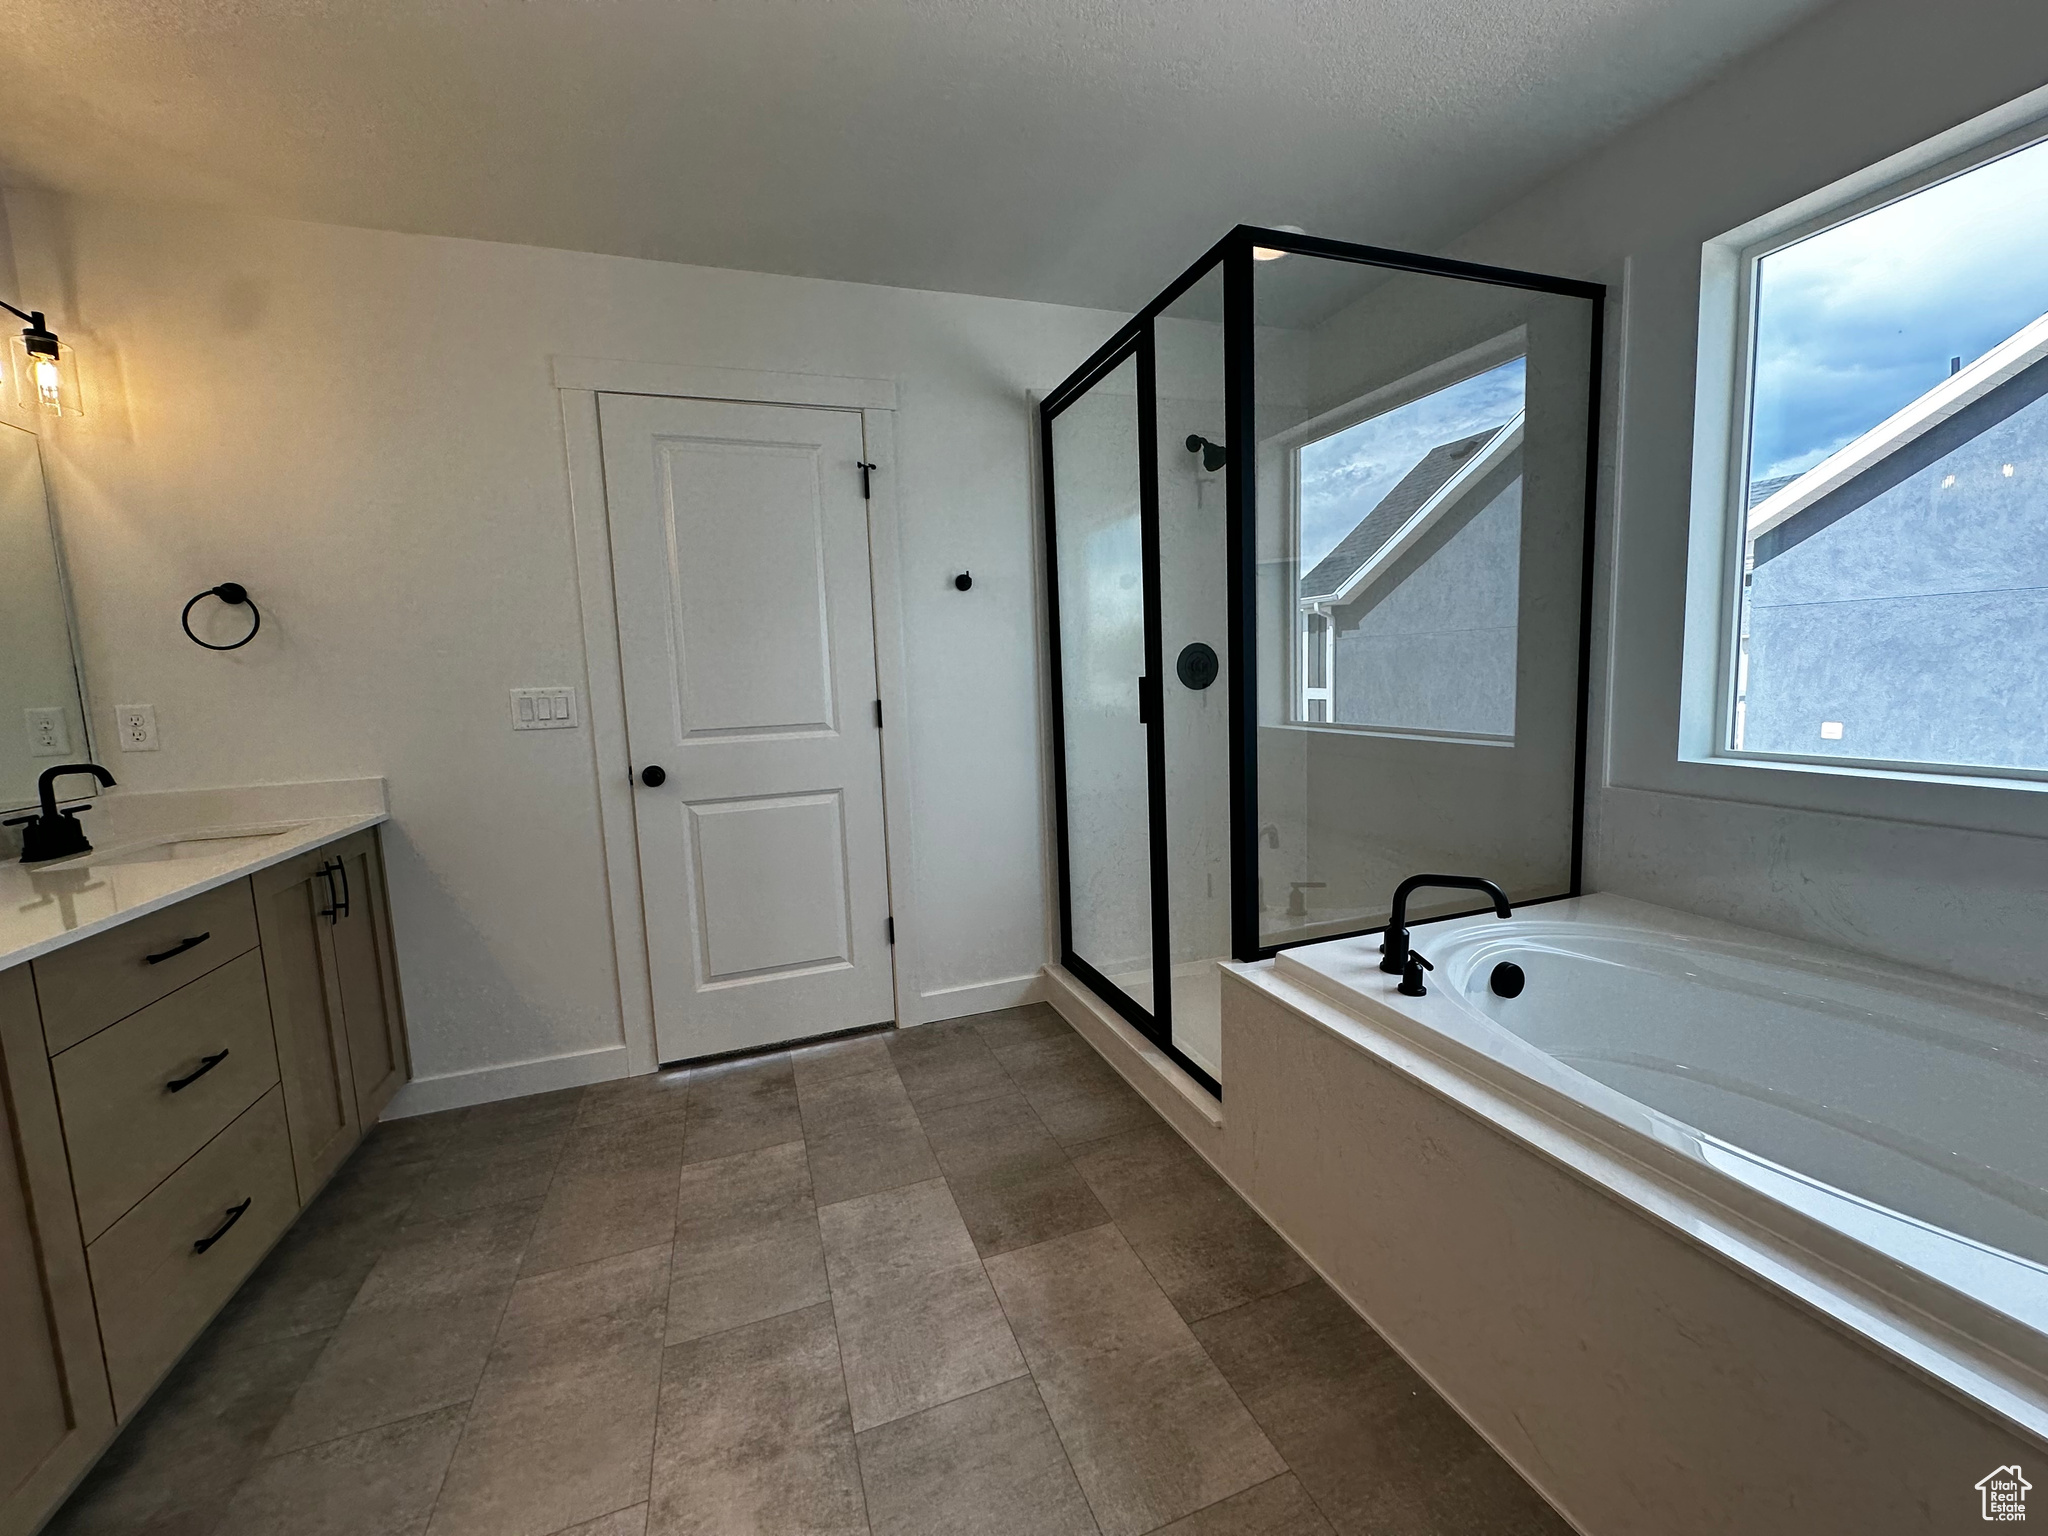 Bathroom featuring separate shower and tub, tile flooring, and vanity